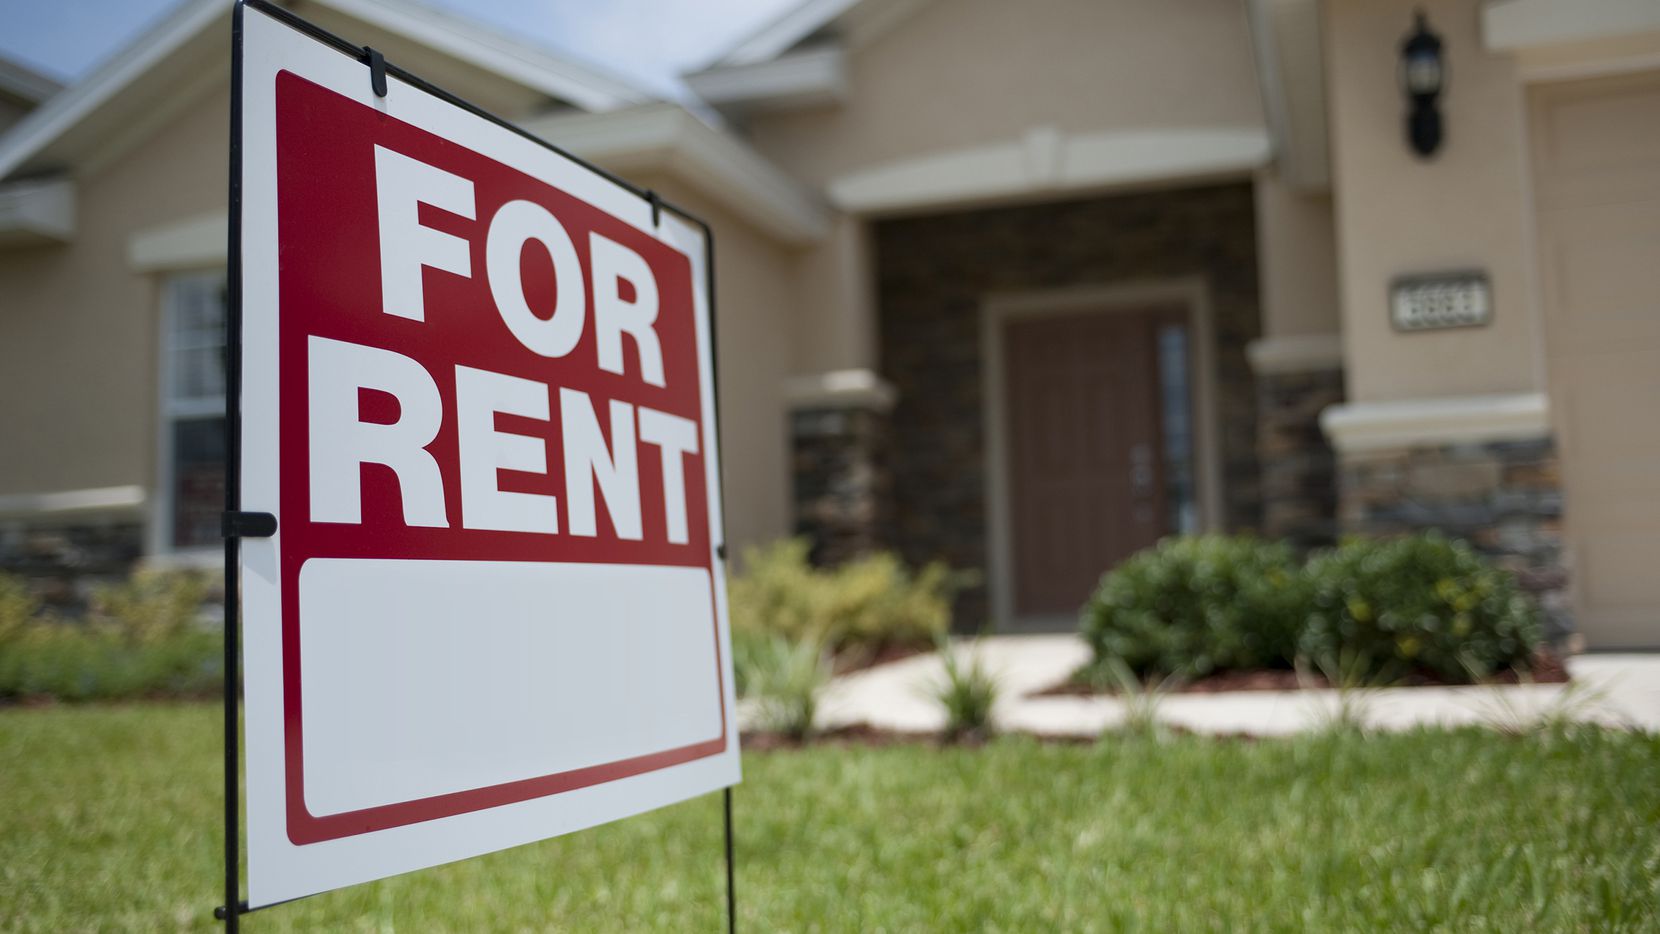 Inexperienced landlords often don’t realize that renting has costs, too, like higher property insurance bills.